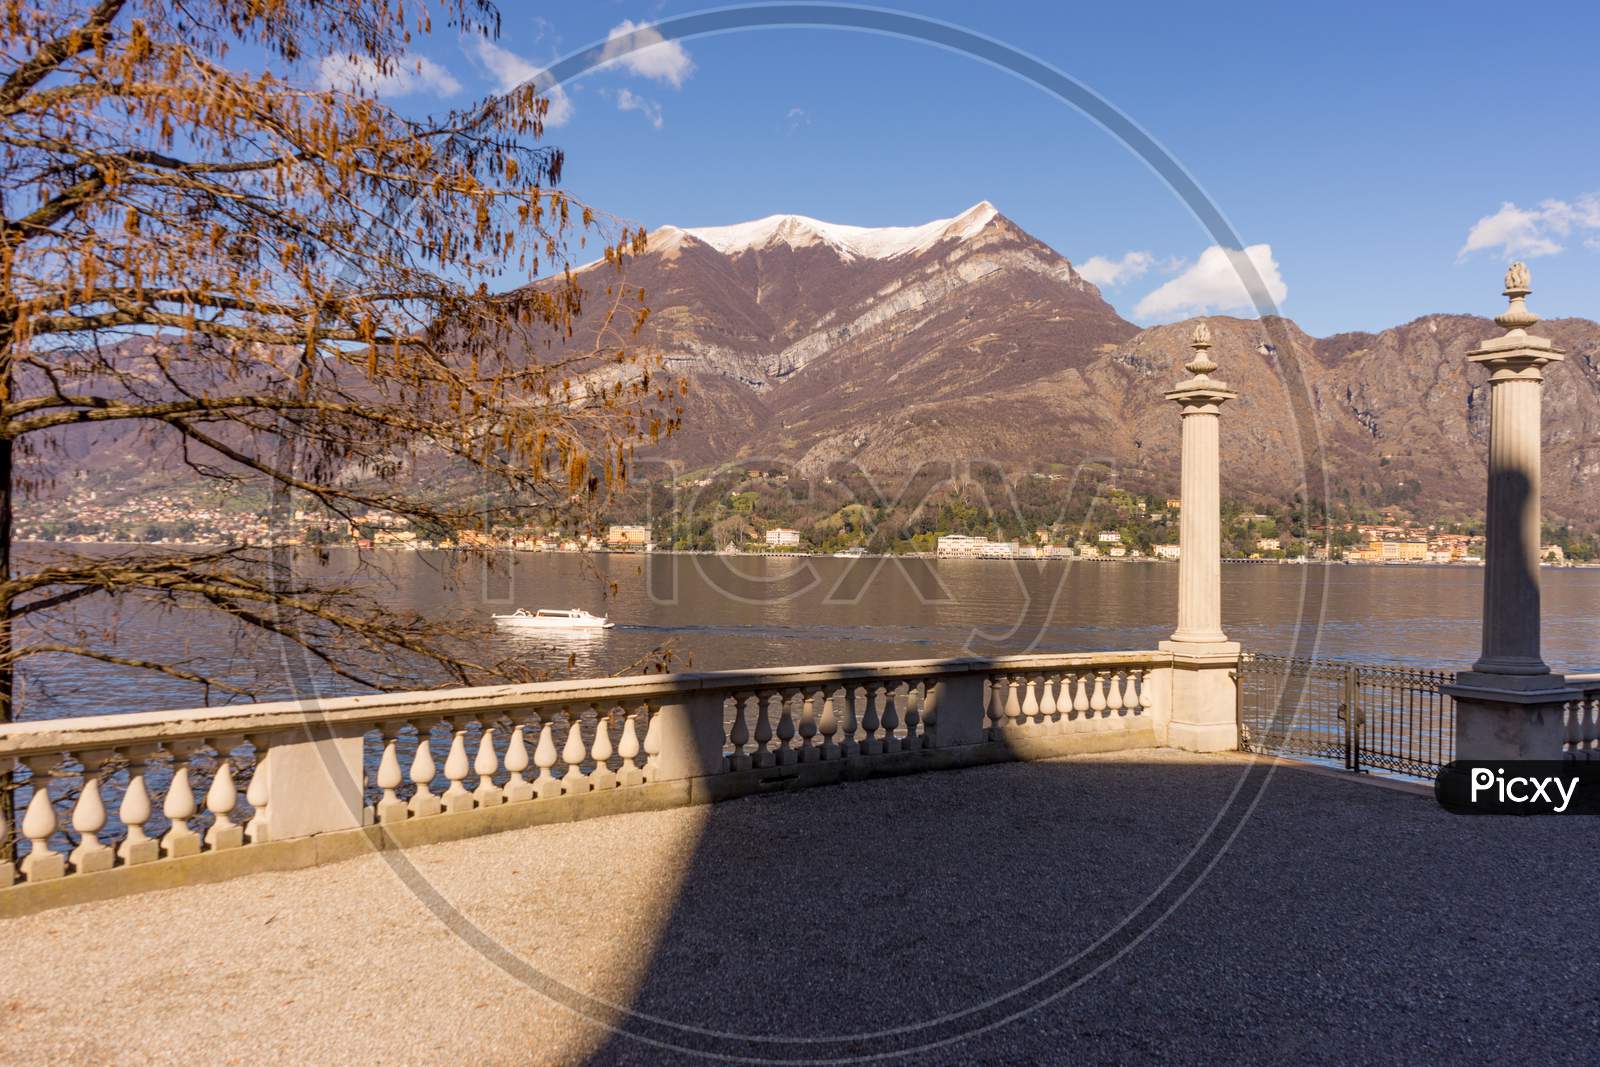 Italy, Bellagio, Lake Como, Fence Overlooking Scenic View Of Snowcapped Mountains Against Blue Sky, Lombardy